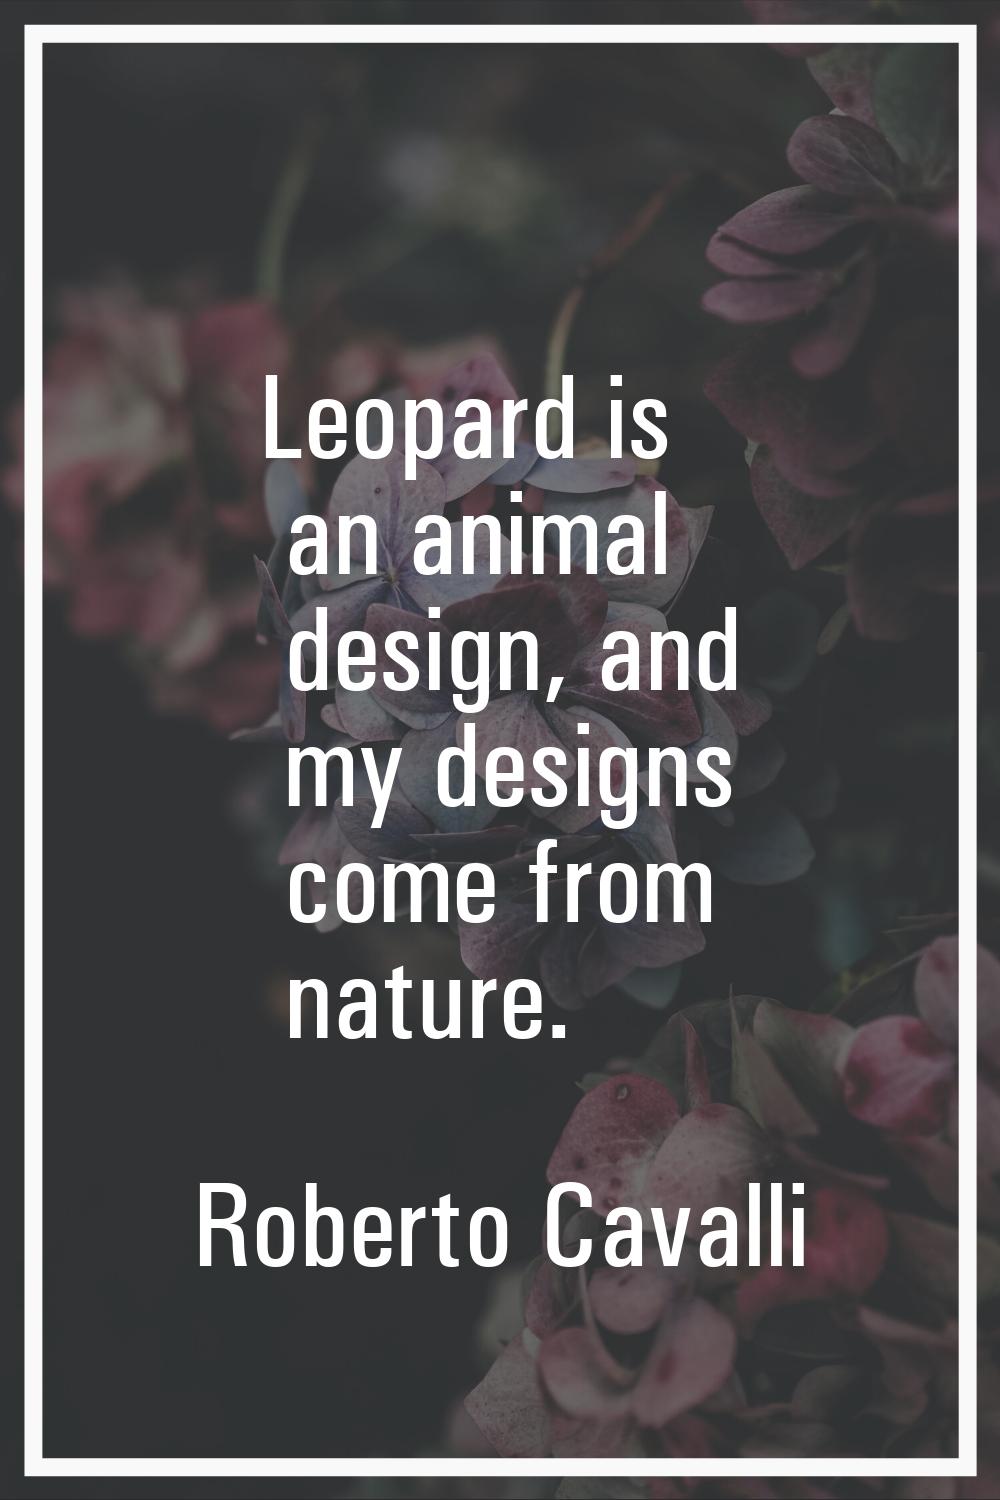 Leopard is an animal design, and my designs come from nature.